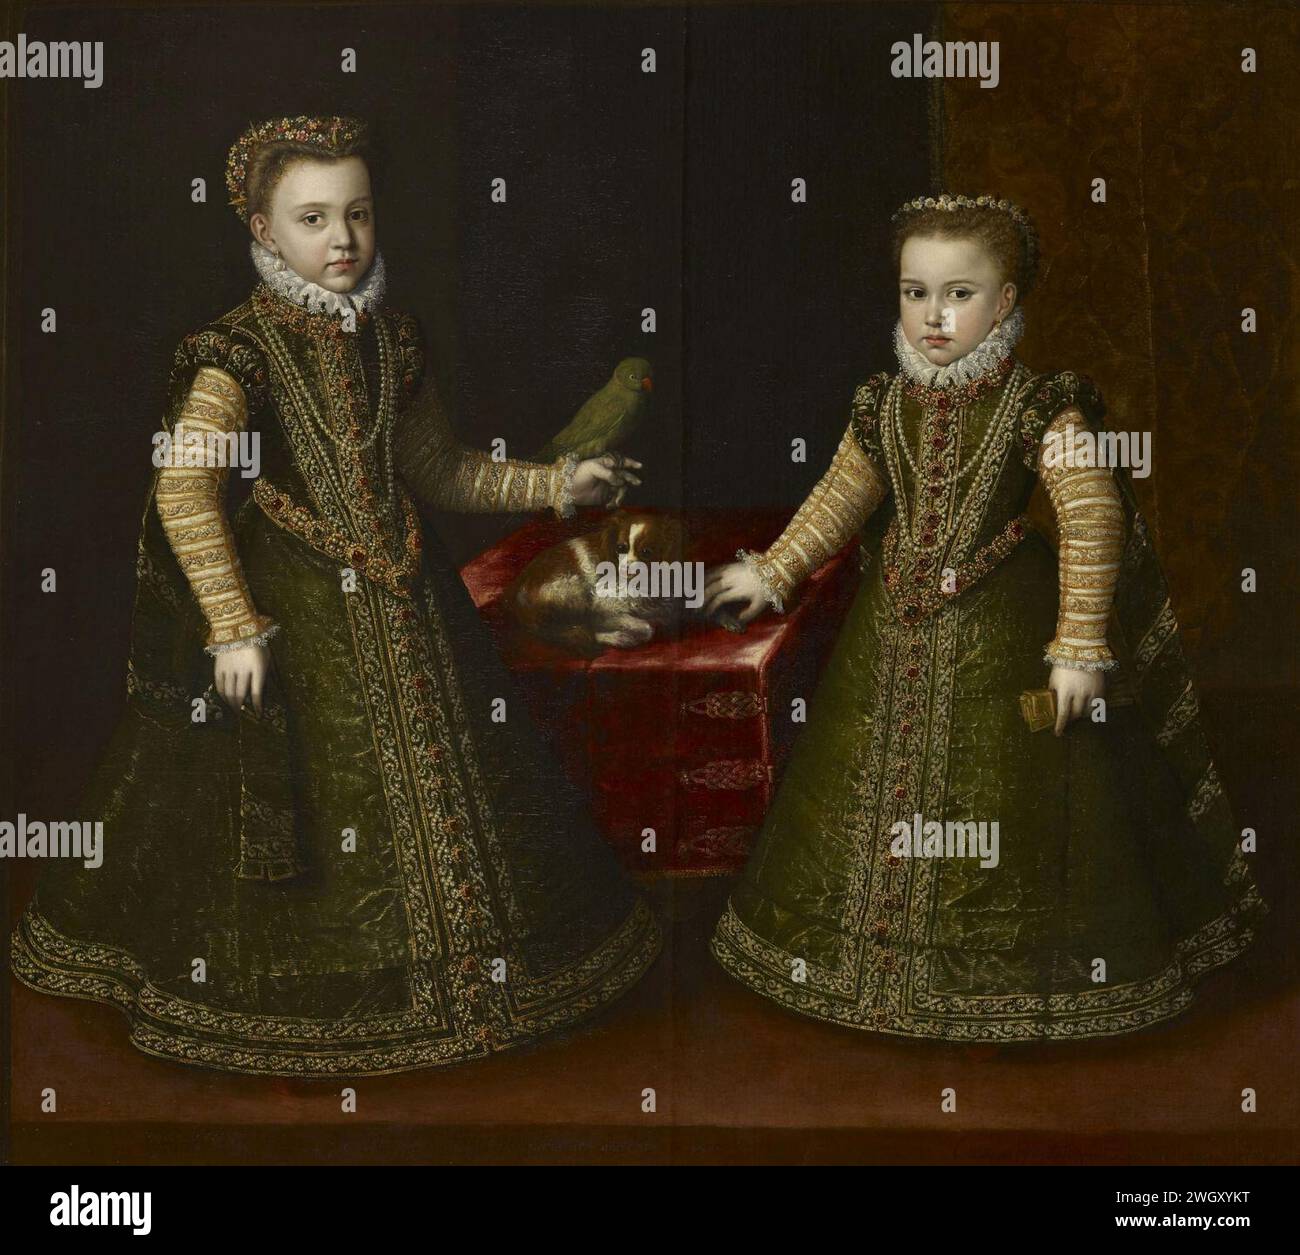 Attributed to artist and workshop of Alonso Sánchez Coello (1531-88) - Isabella Clara Eugenia and Catharina, Daughters of Philip II, King of Spain Stock Photo